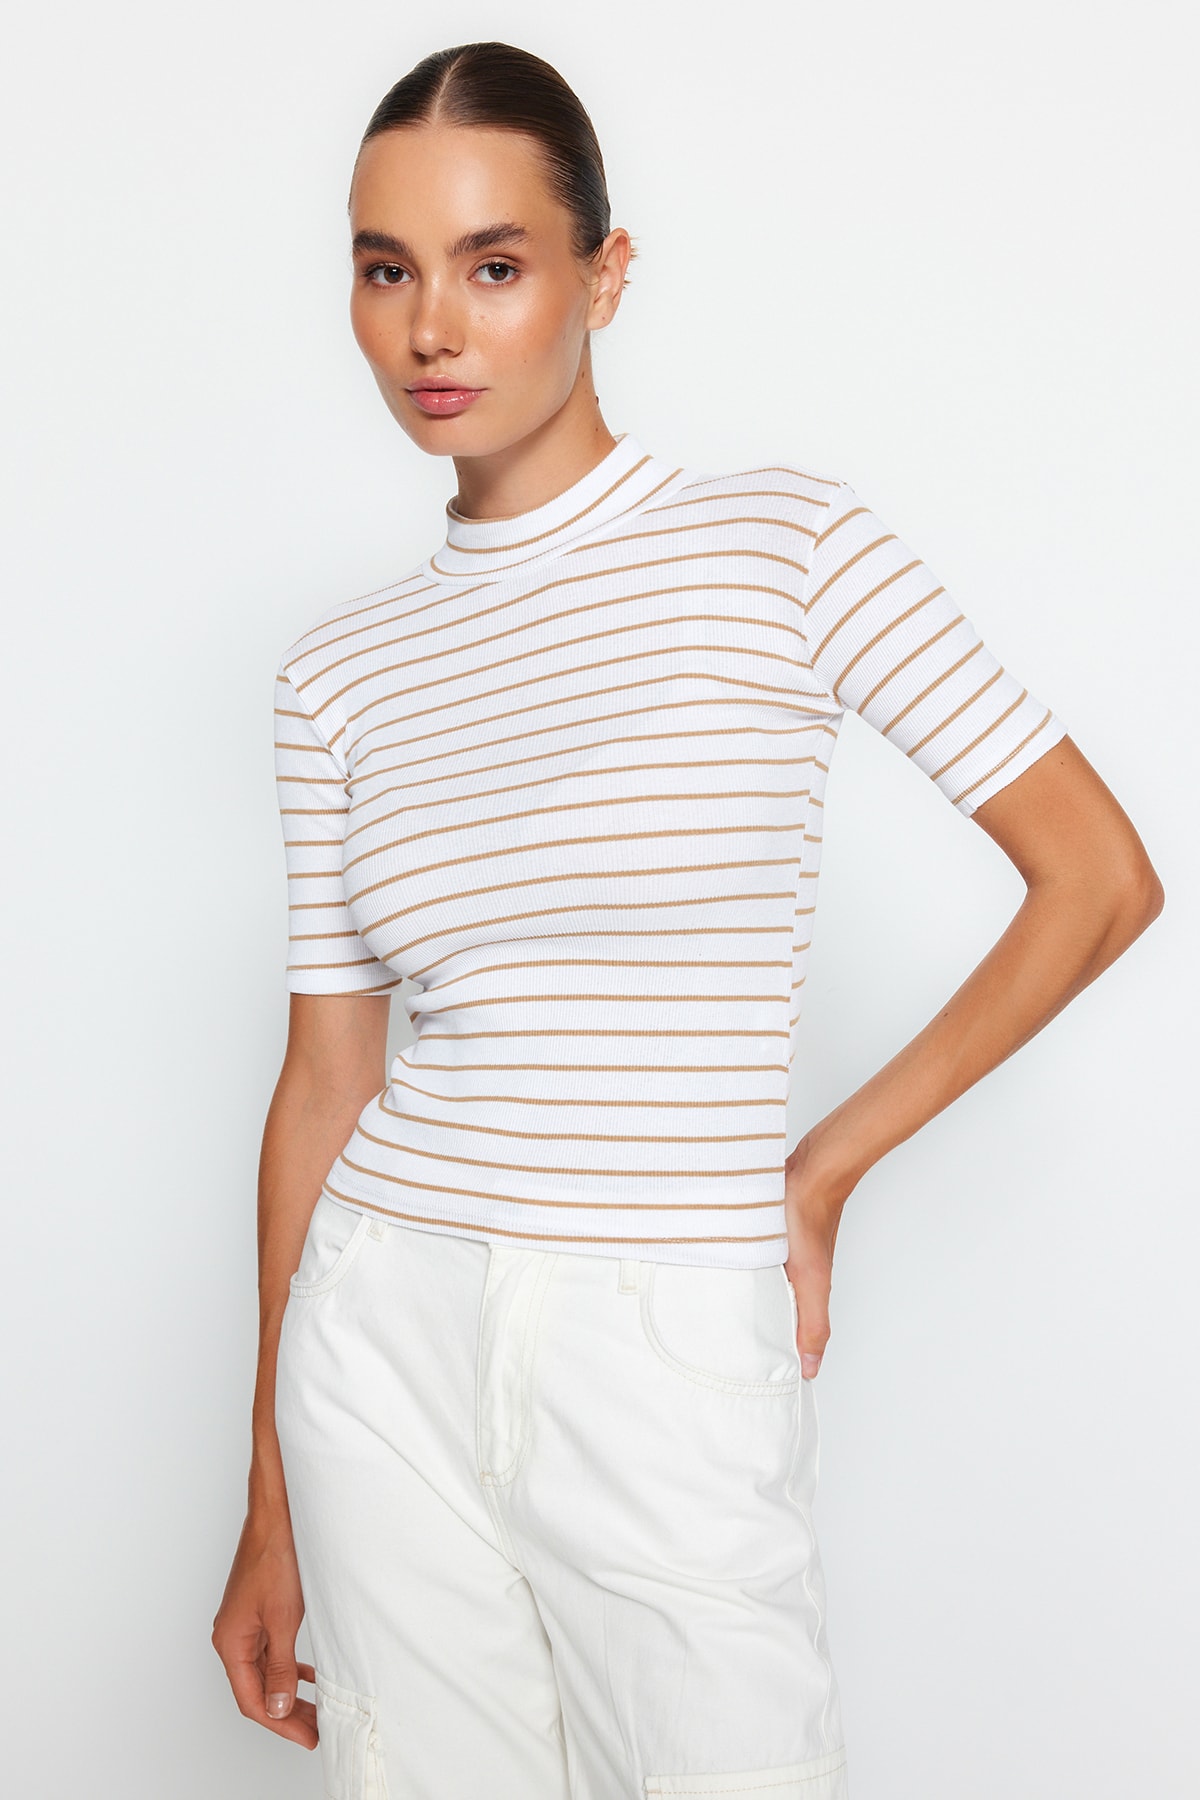 Trendyol Camel Stripe Standing Collar Fitted/Simple Short Sleeve Flexible Ribbed Knitted Blouse